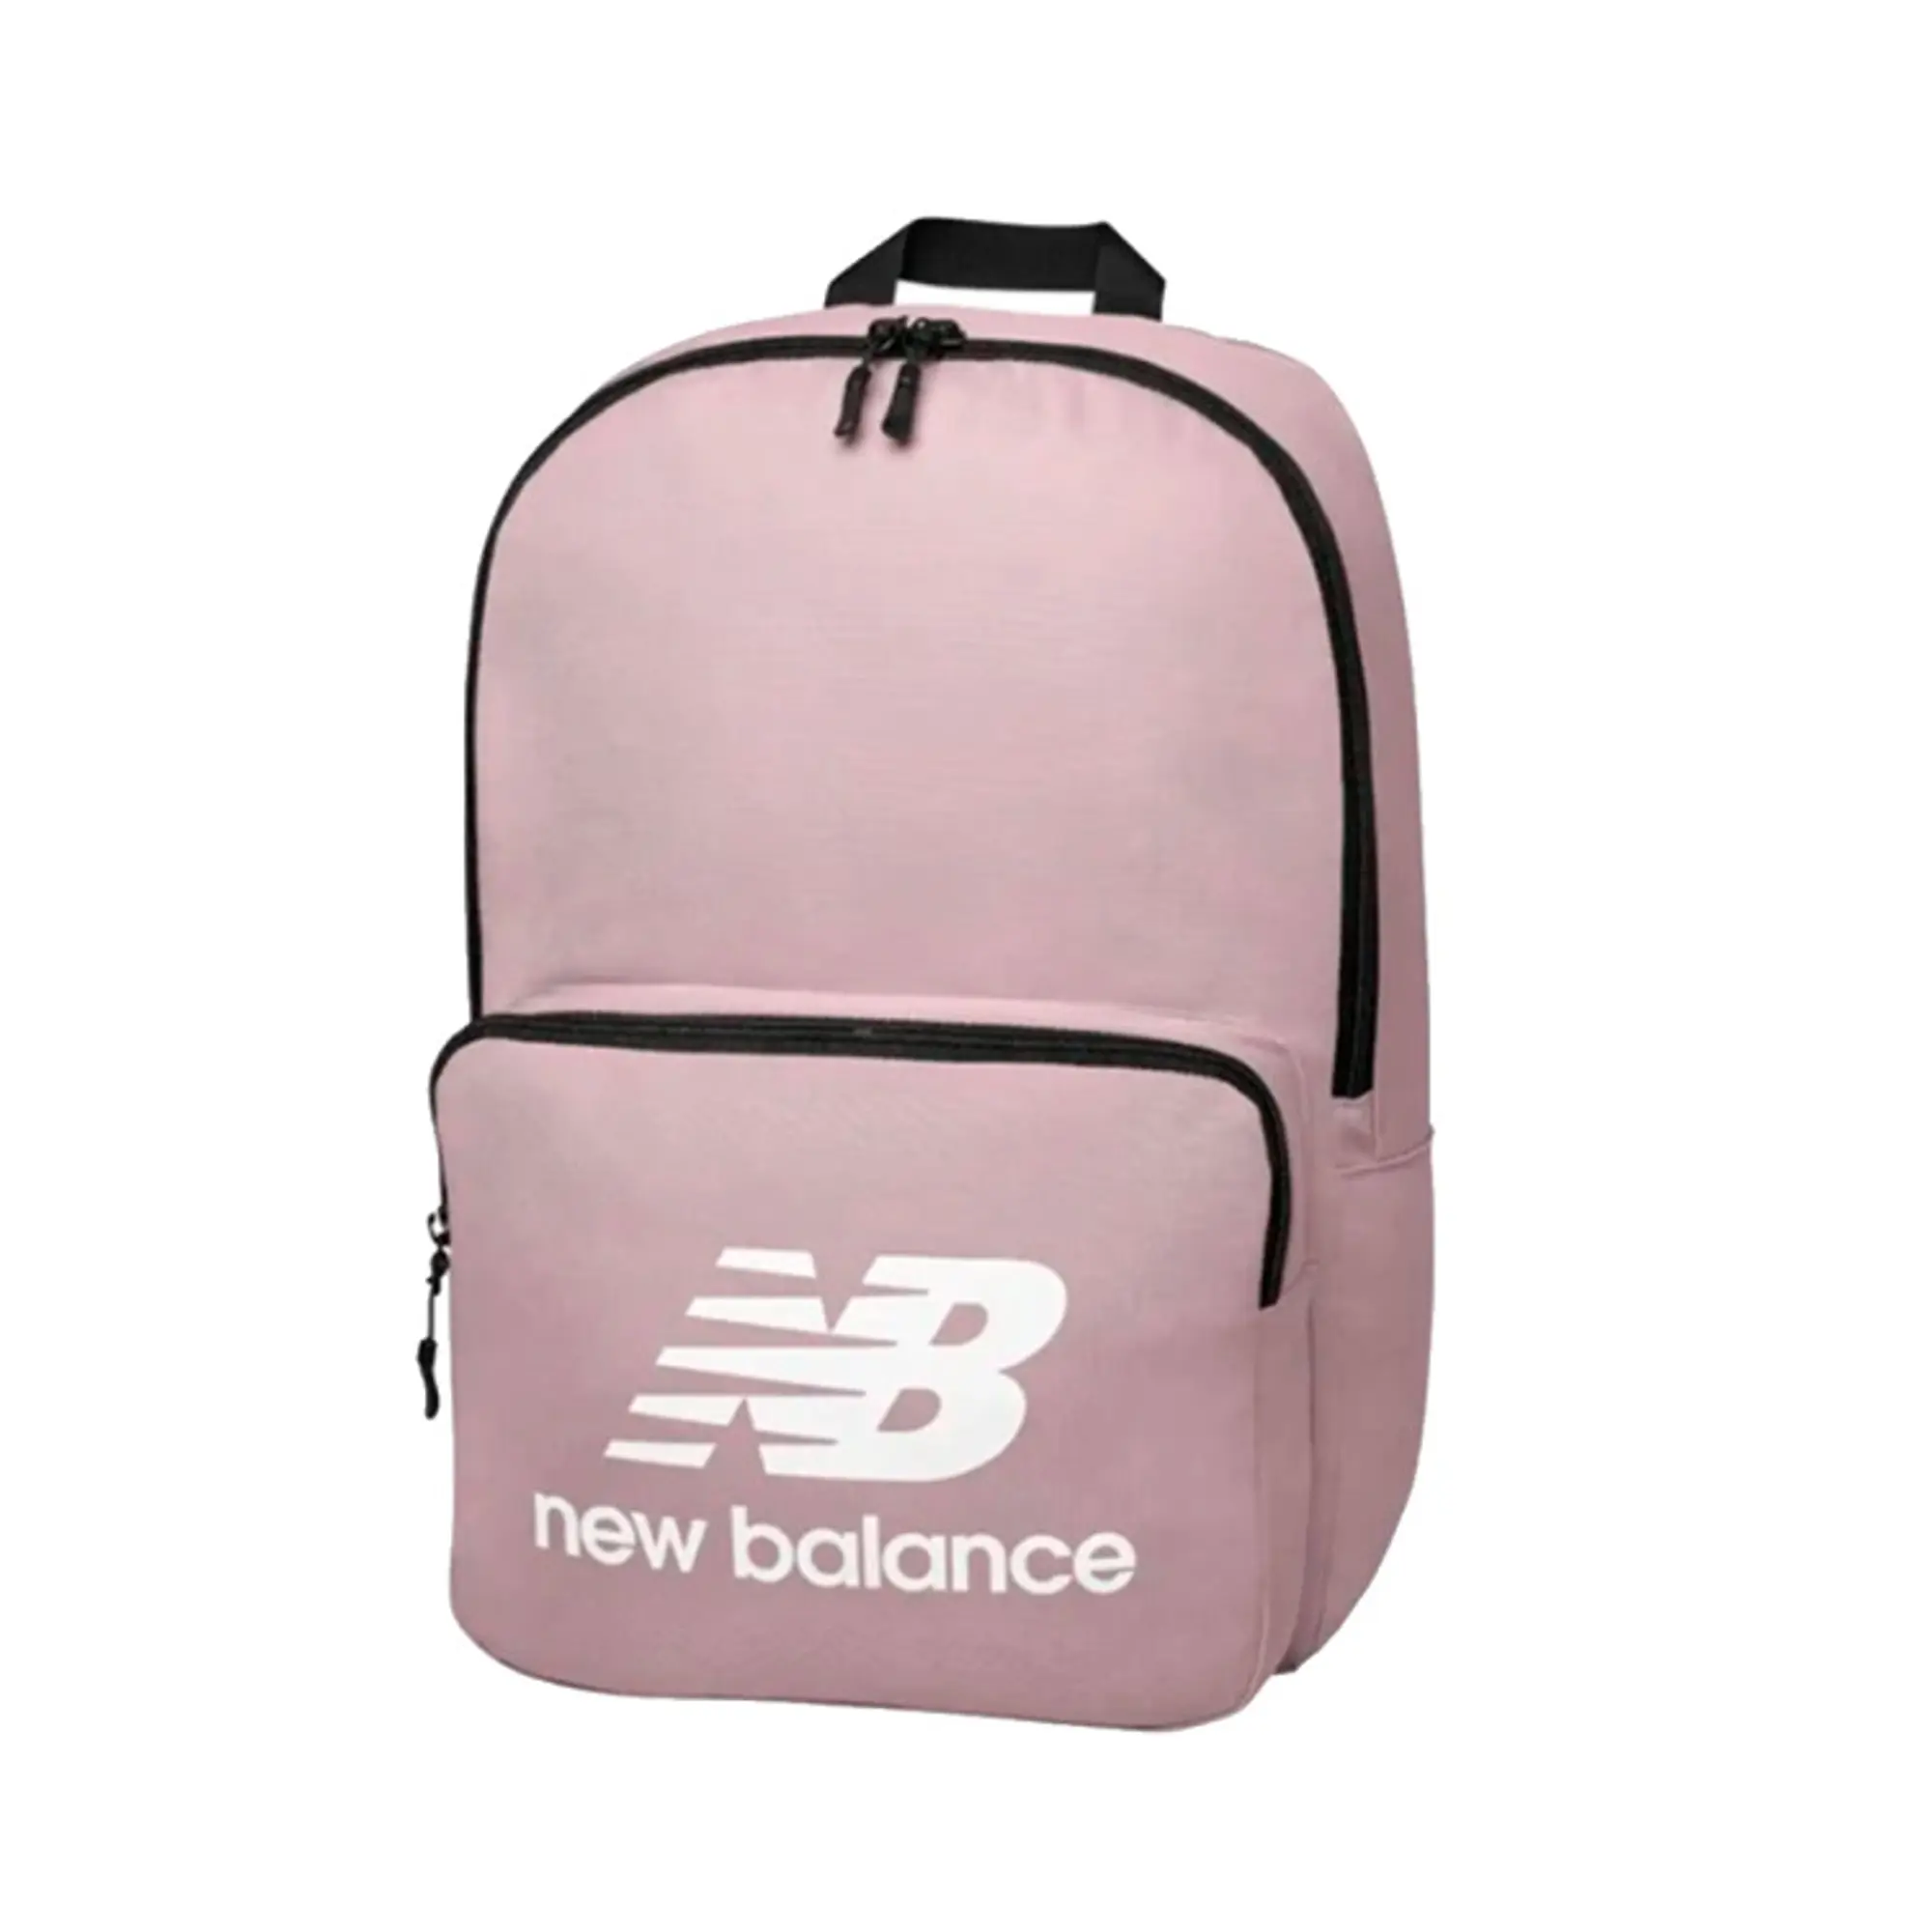 New Balance Unisex Team Classic Backpack in Pink/White Polyester